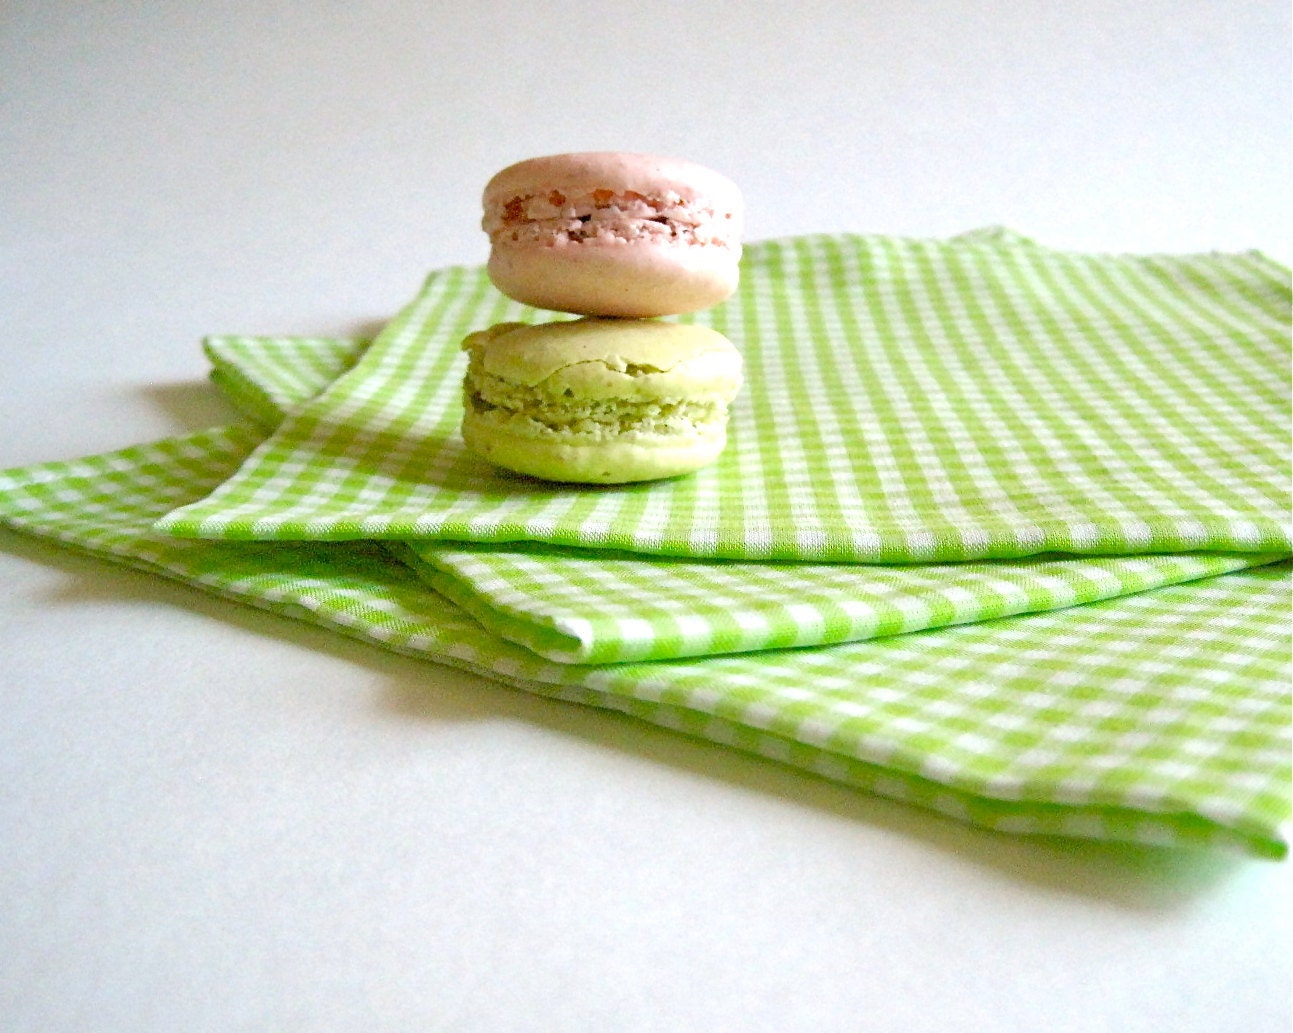 Picnic Table NAPKINS Set of 4 in Mint Green Gingham / Retro Checkered Kitchen Food Linens - Eco friendly Summer - SewnNatural